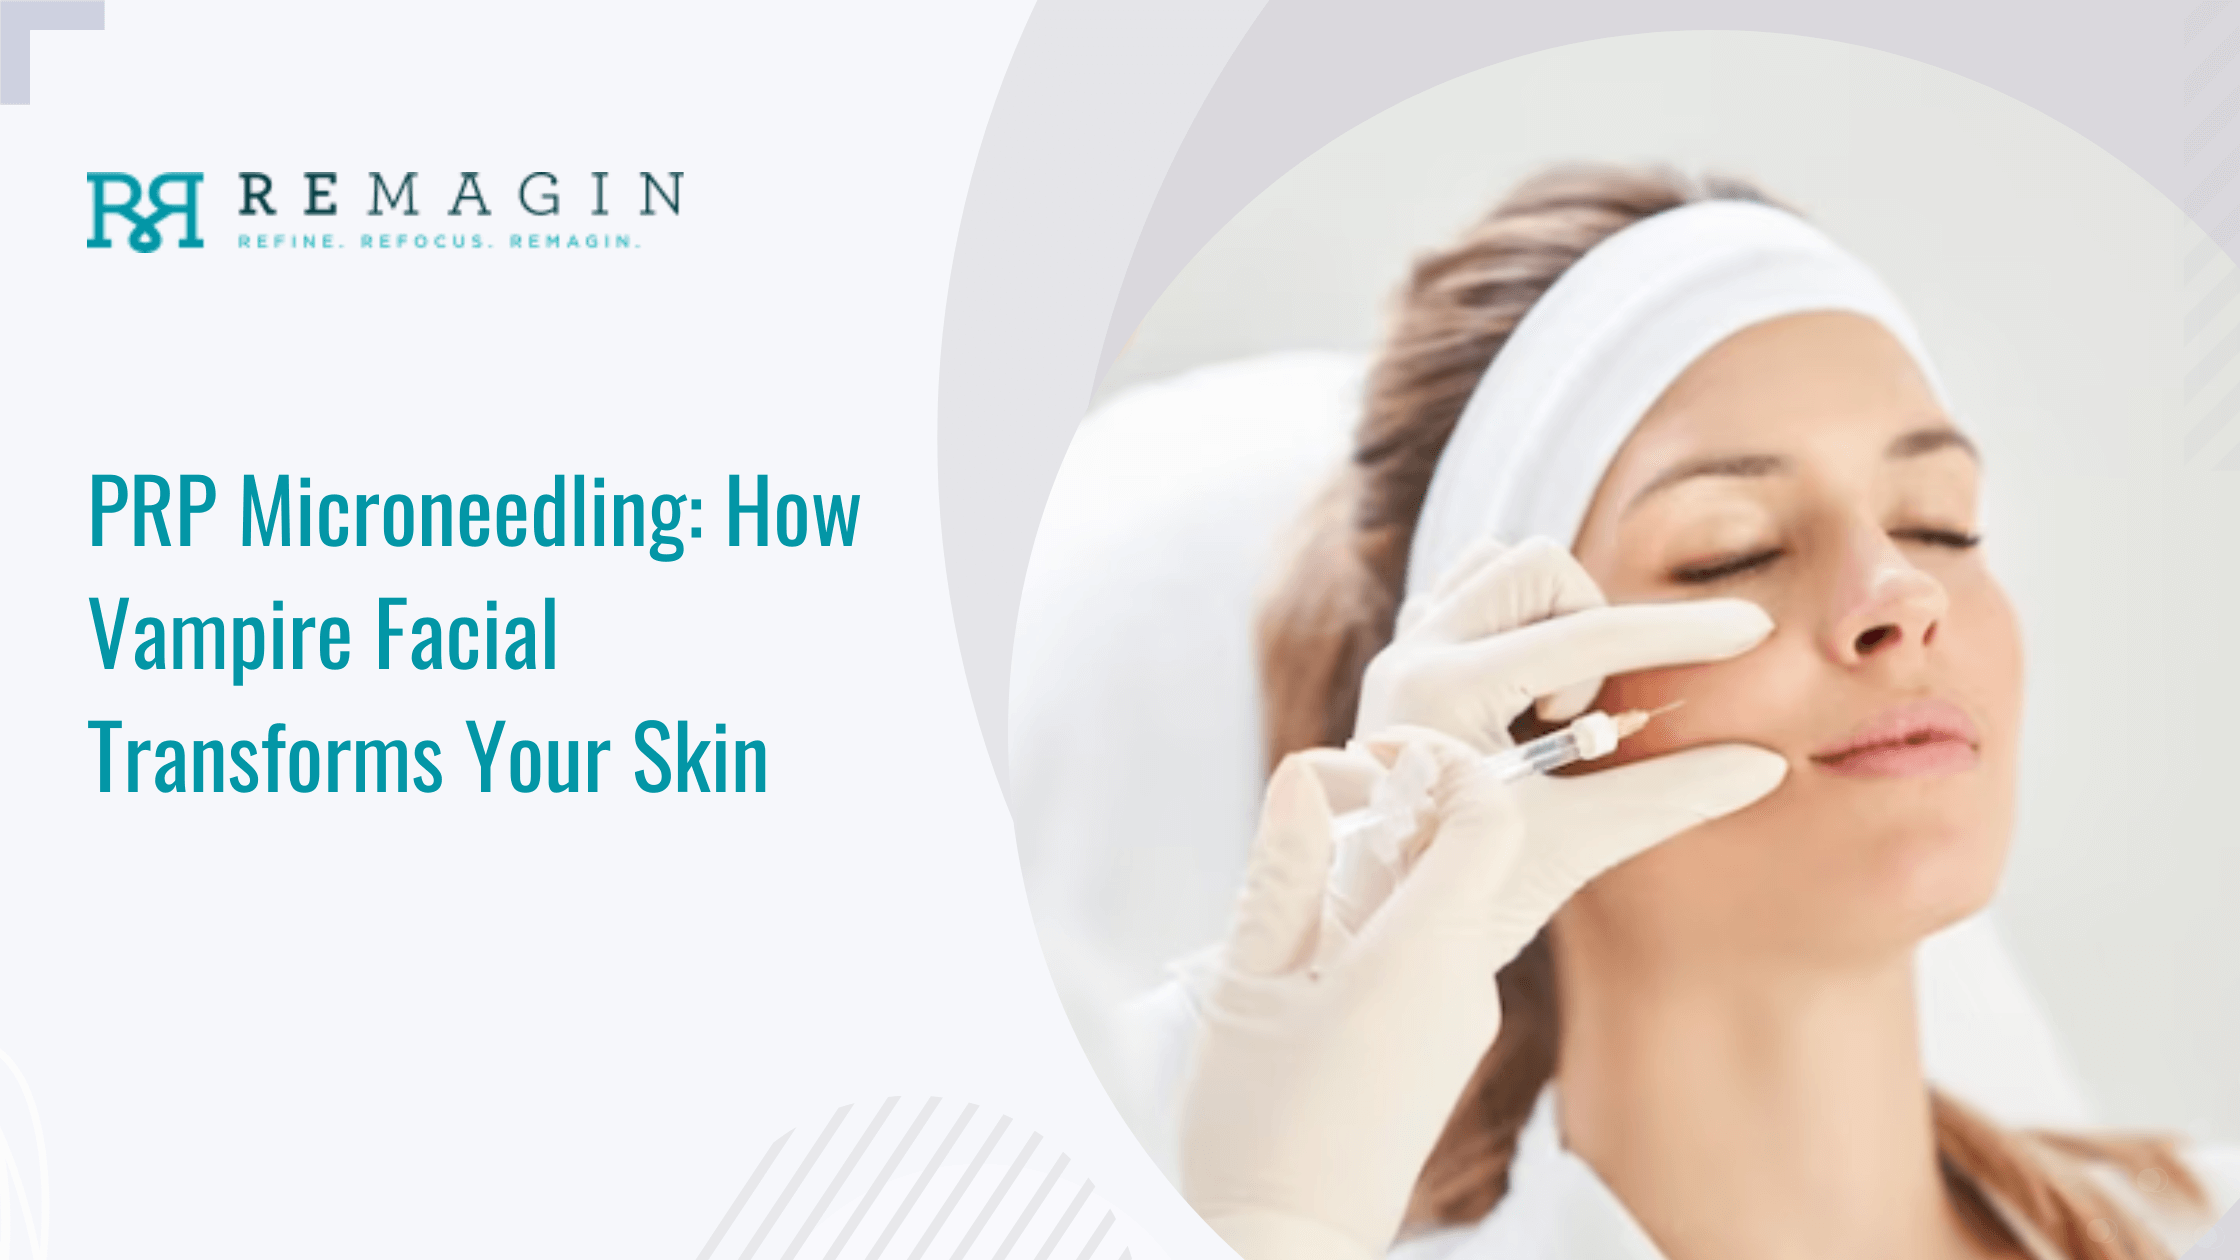 PRP Microneedling: How Vampire Facial Transforms Your Skin